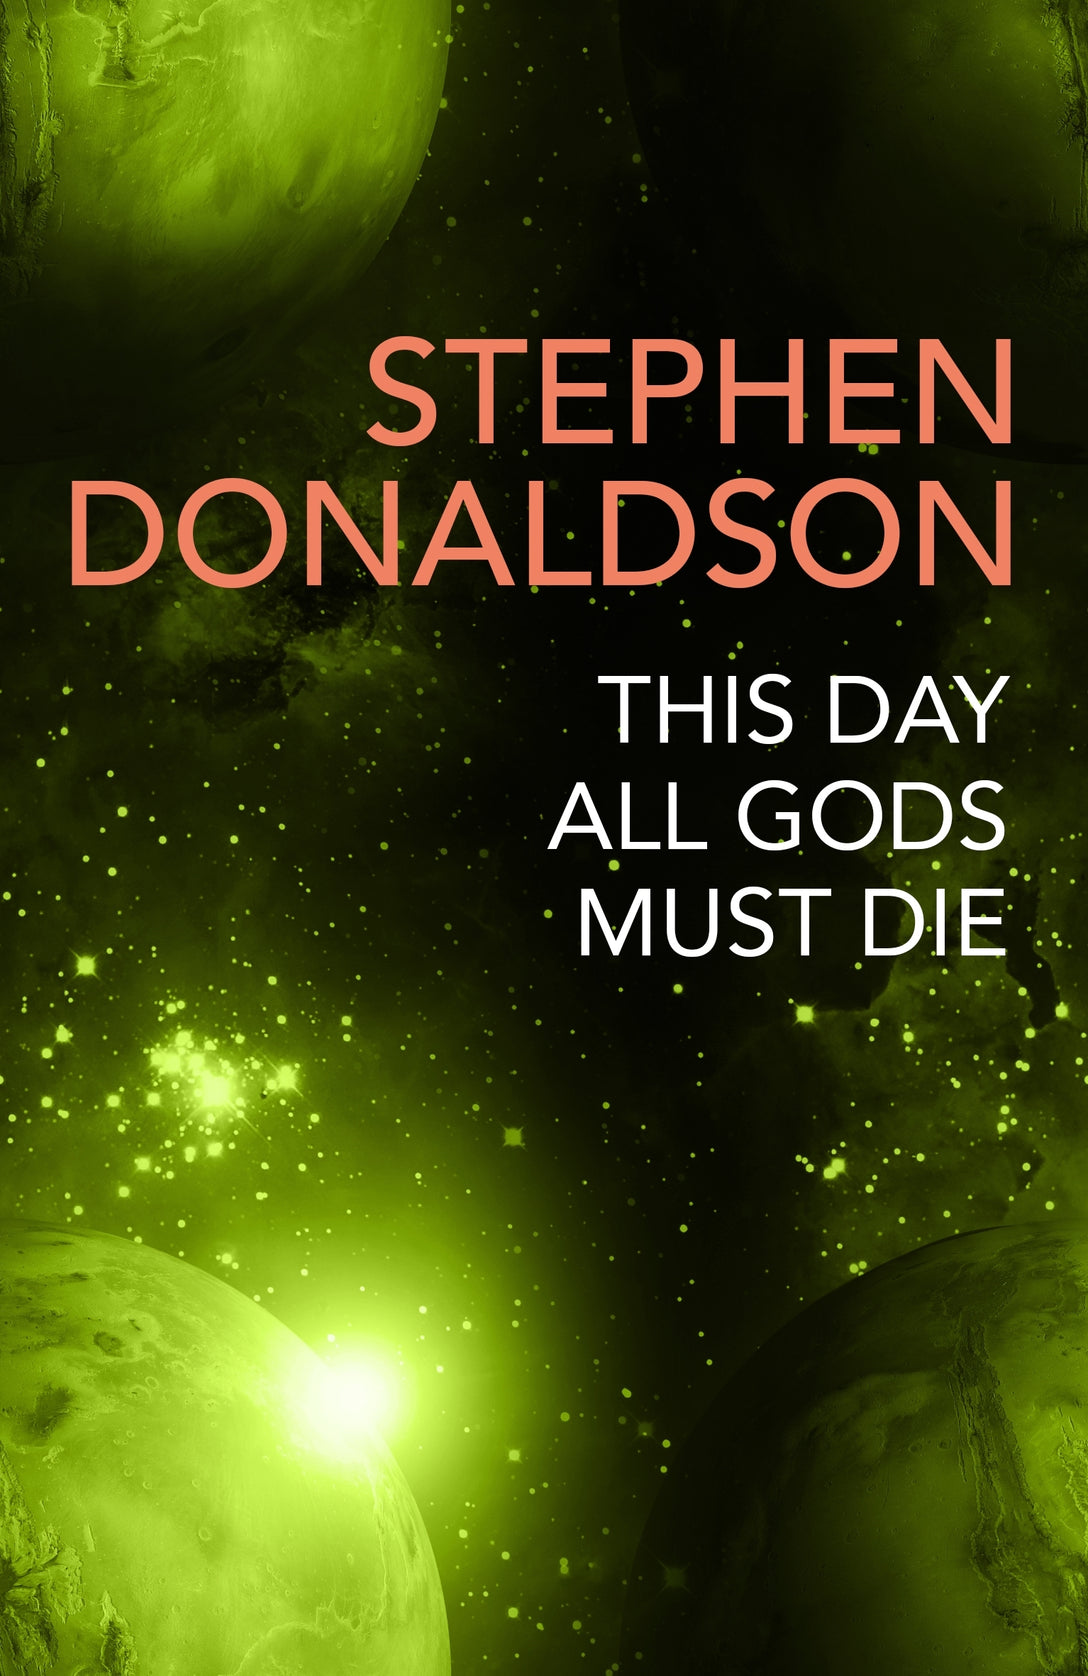 This Day All Gods Die by Stephen Donaldson